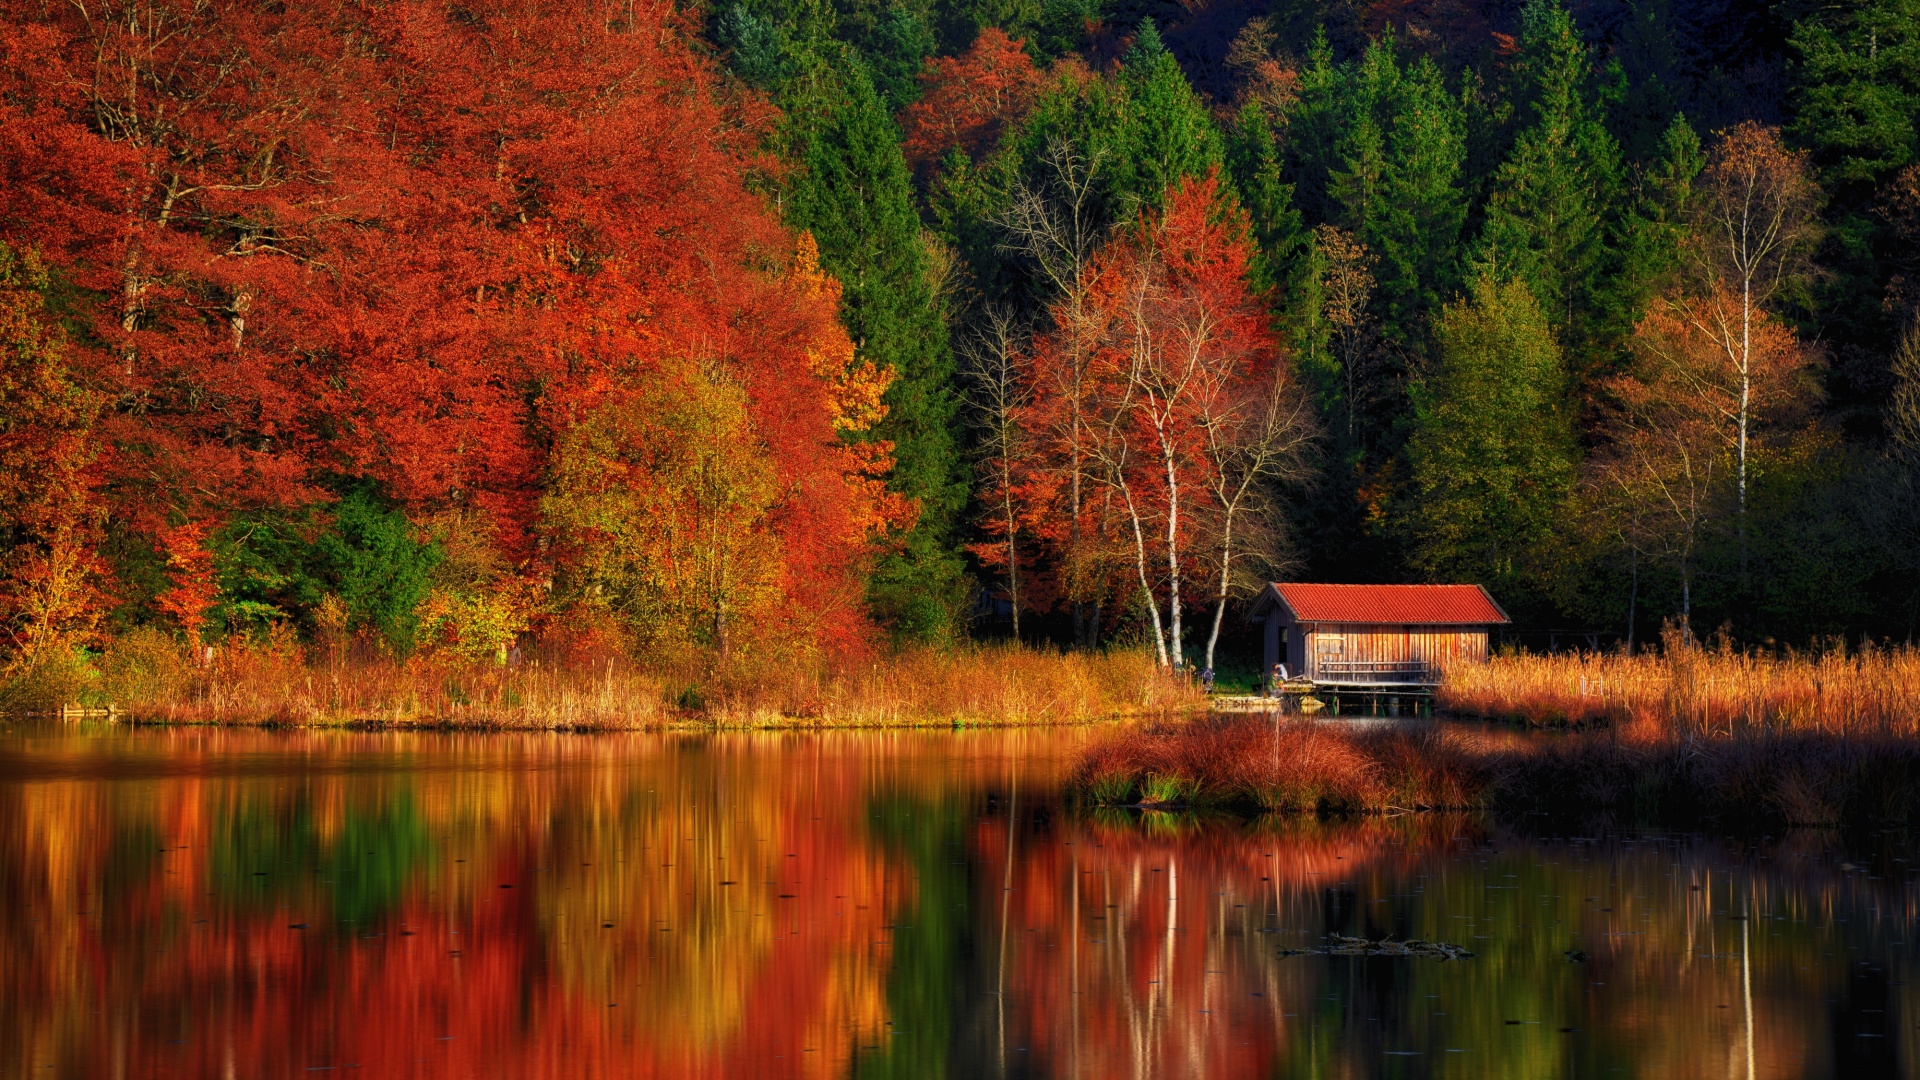 Autumn Scenery Wallpaper 4K, Lakeside, Colourful, Forest, Reflection, Nature